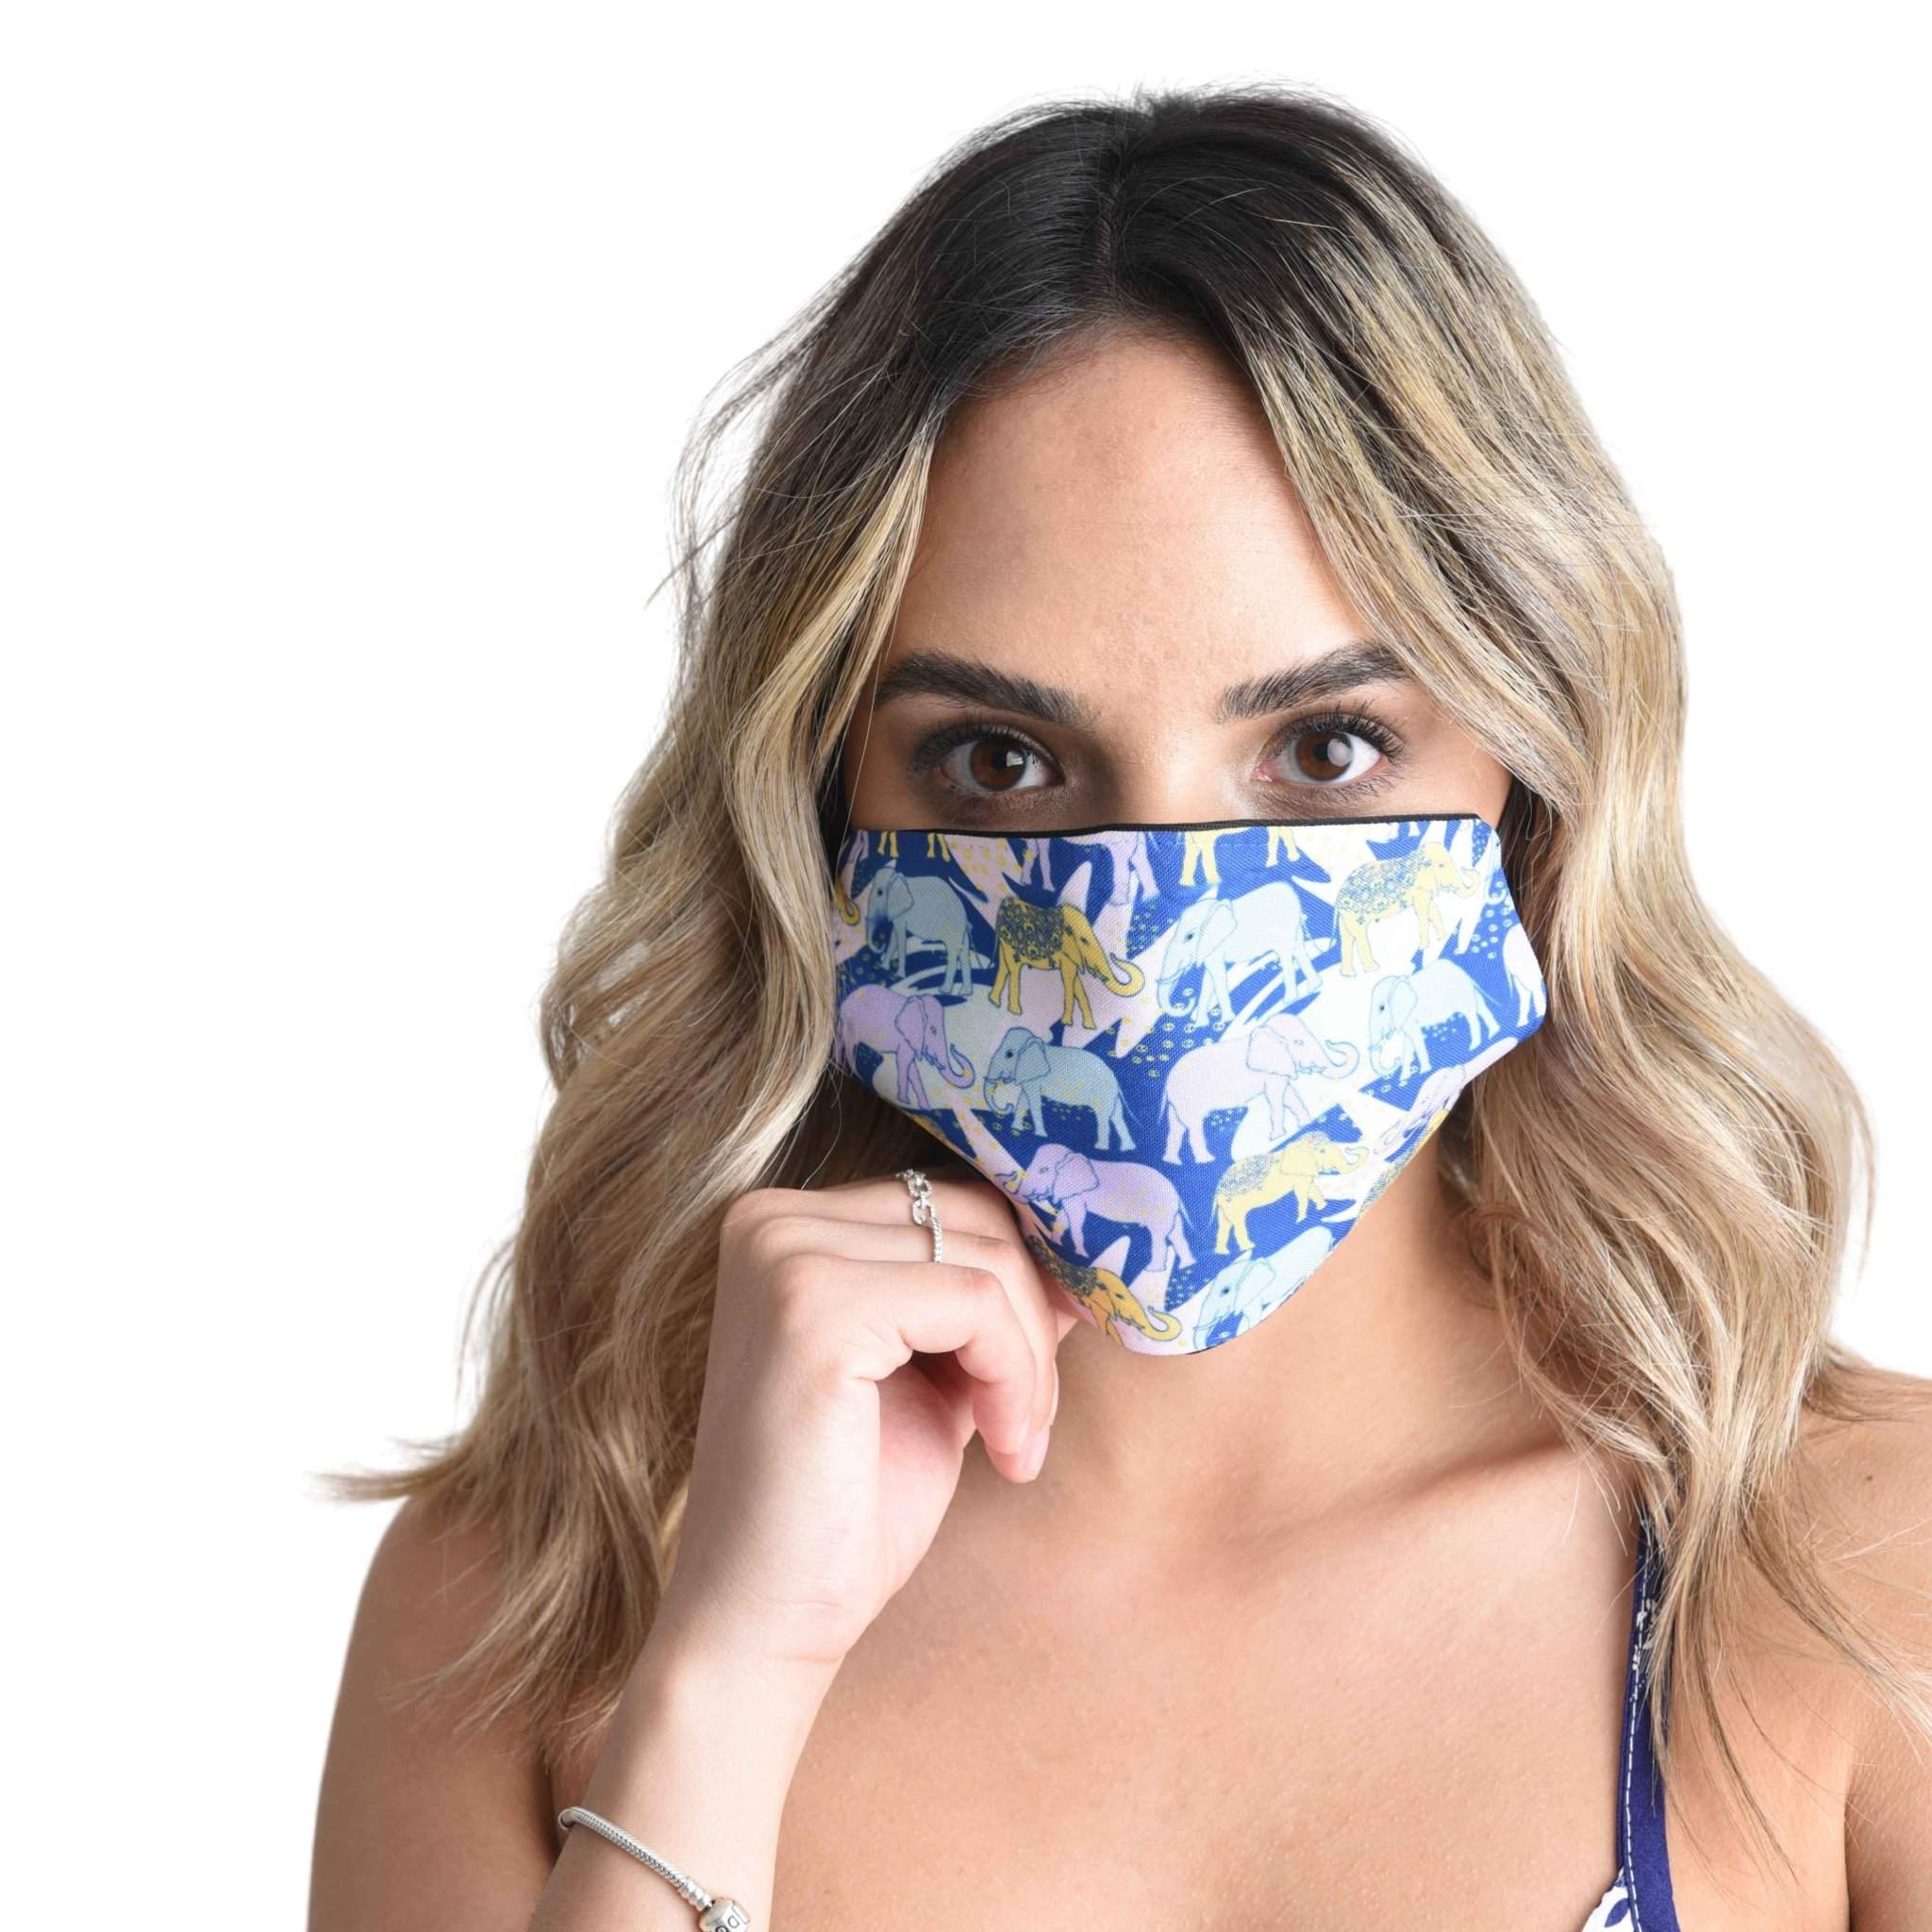 FACE MASK - Purple Elepanta Face Masks - Buy Today Elephant Pants Jewelry And Bohemian Clothes Handmade In Thailand Help To Save The Elephants FairTrade And Vegan